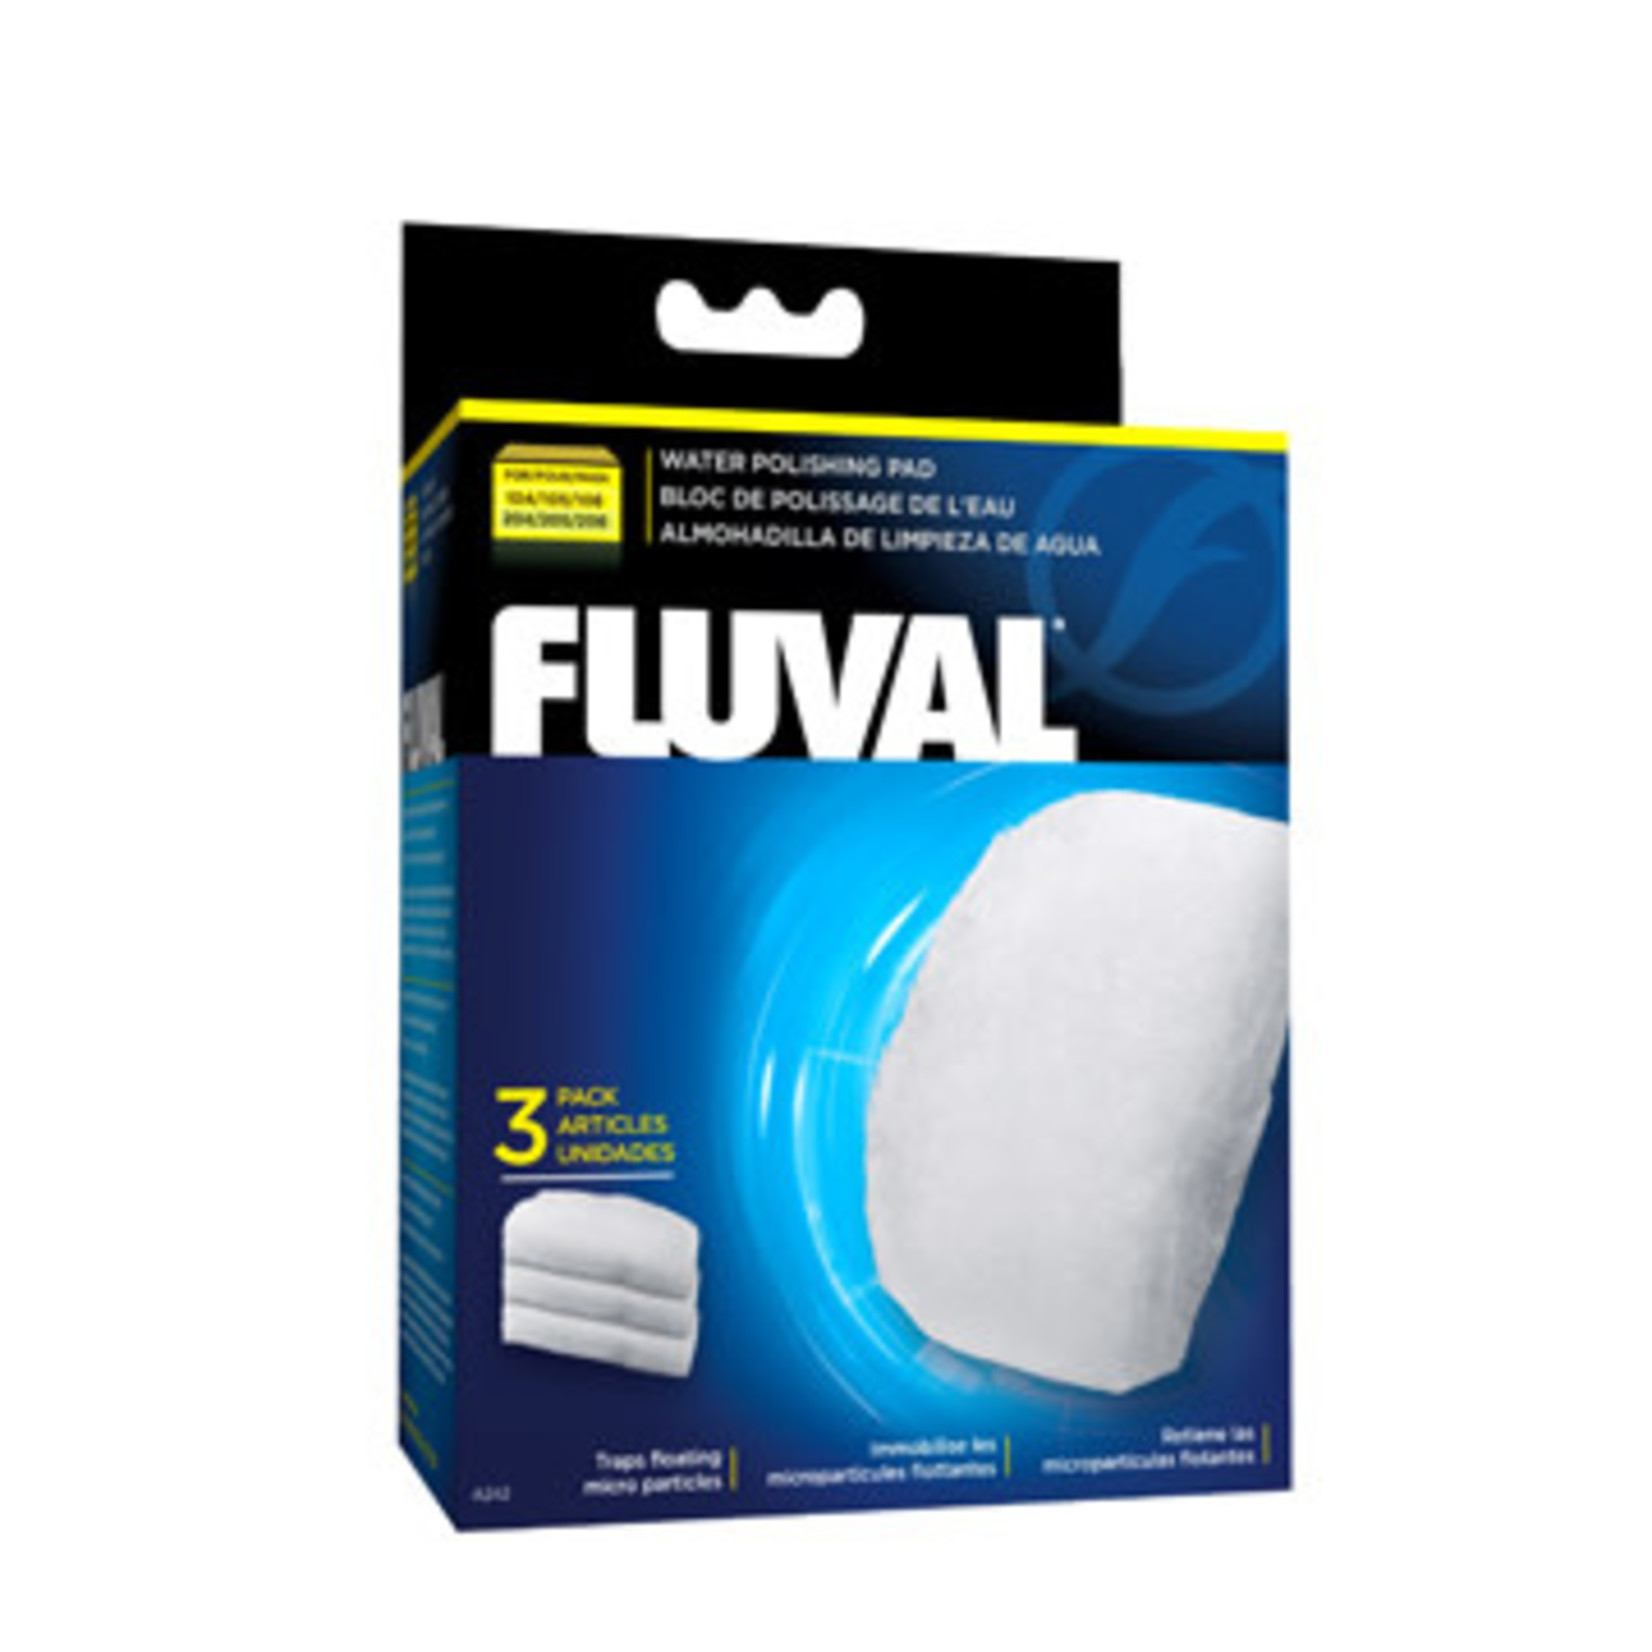 Fluval Polishing Pad for 104/105/106 and 204/205/206 - 3 pieces